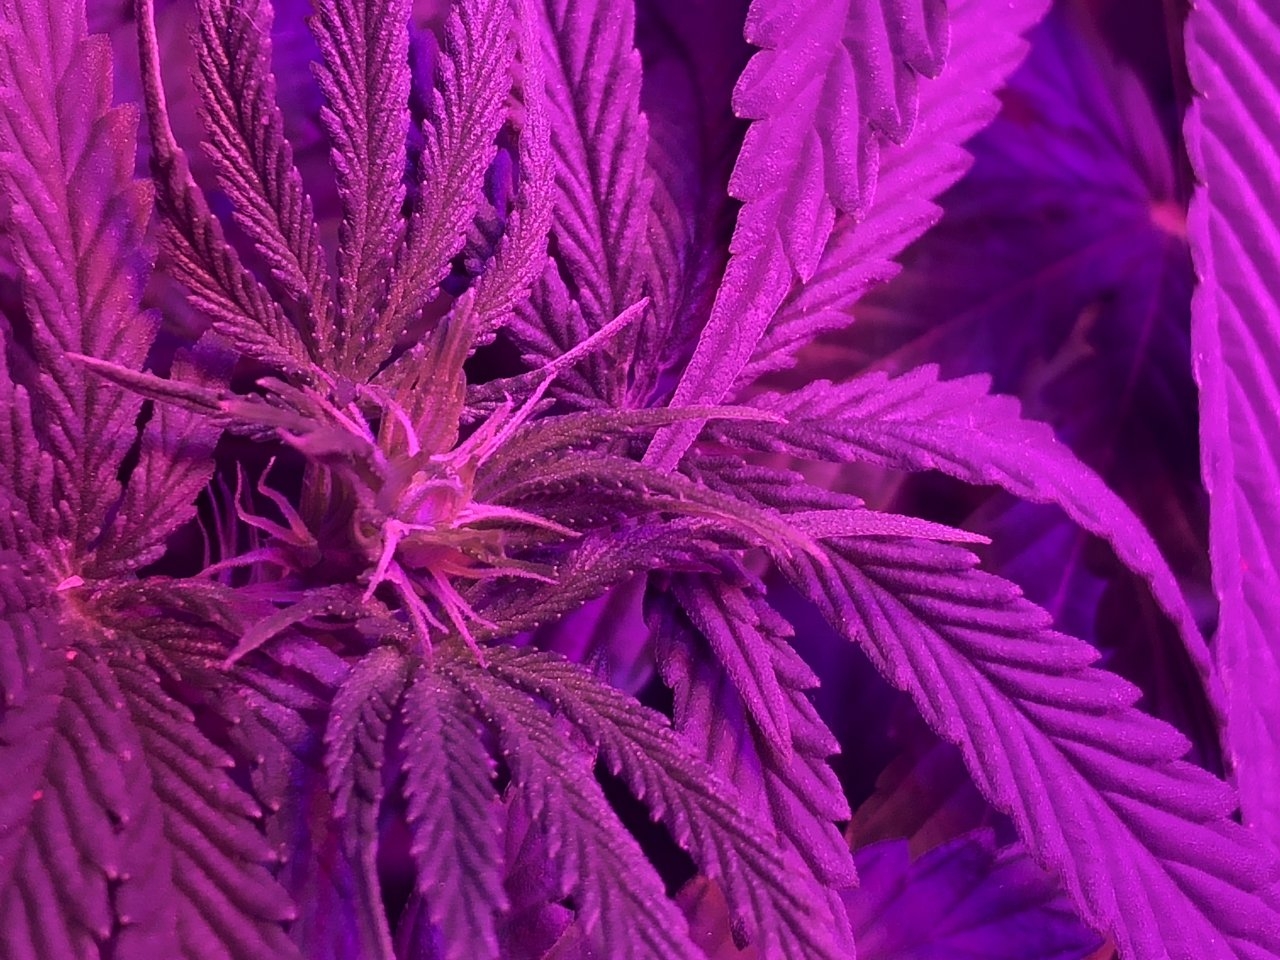 Pistils coming out